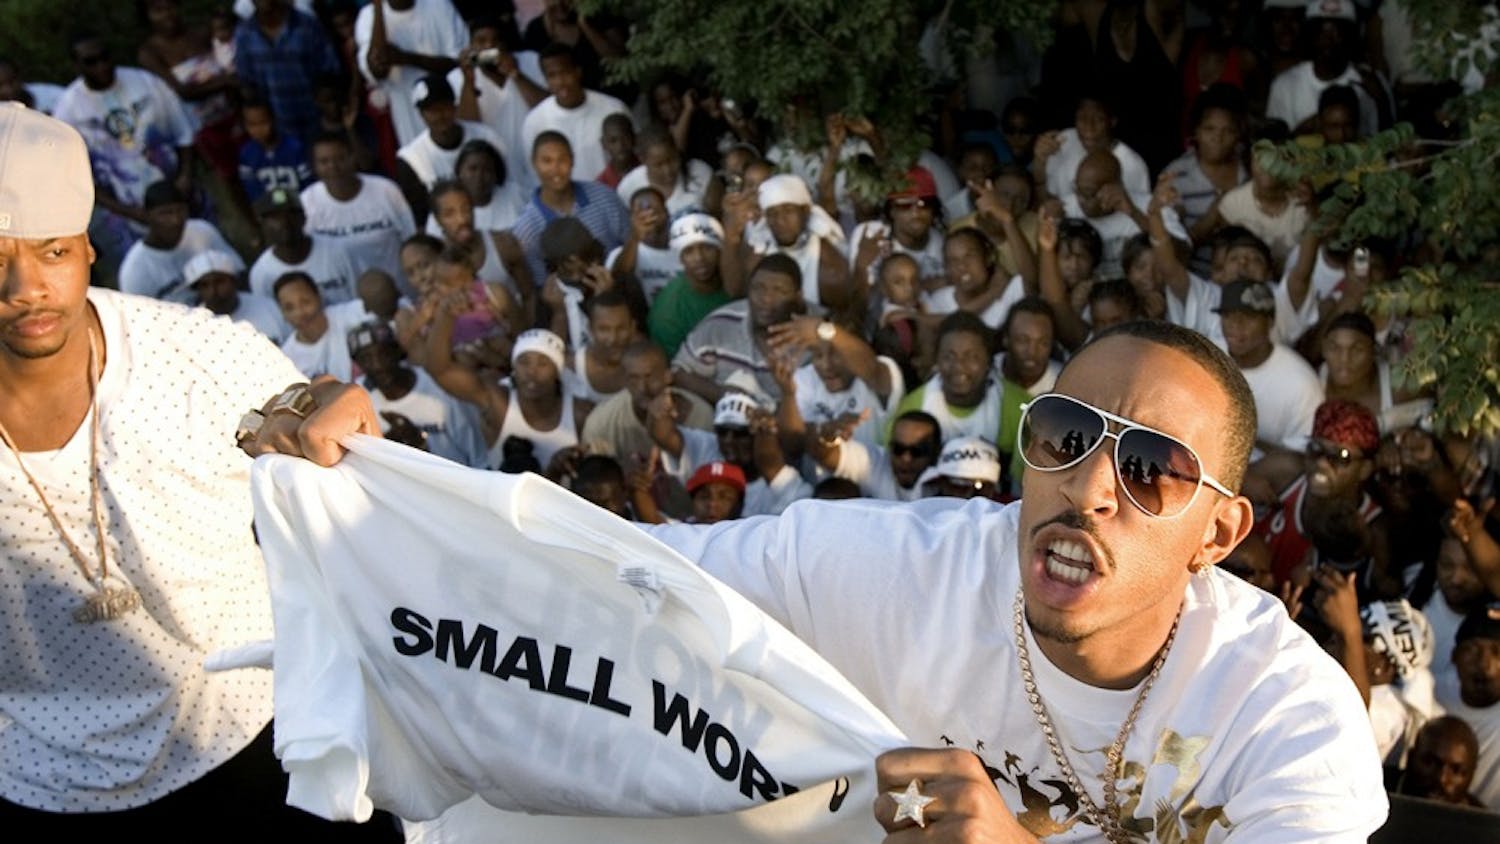 Grammy award winning rapper Ludacris, right, performs during a taping for a video for up-and-coming rapper Sheldon Bullock, known as Small World, 25, at left, August 4, 2007, in Raleigh, North Carolina. Small World wanted Ludacris to be part of his first video, although his first single has already hit the airwaves. (Corey Lowenstein/Raleigh News & Observer/MCT)